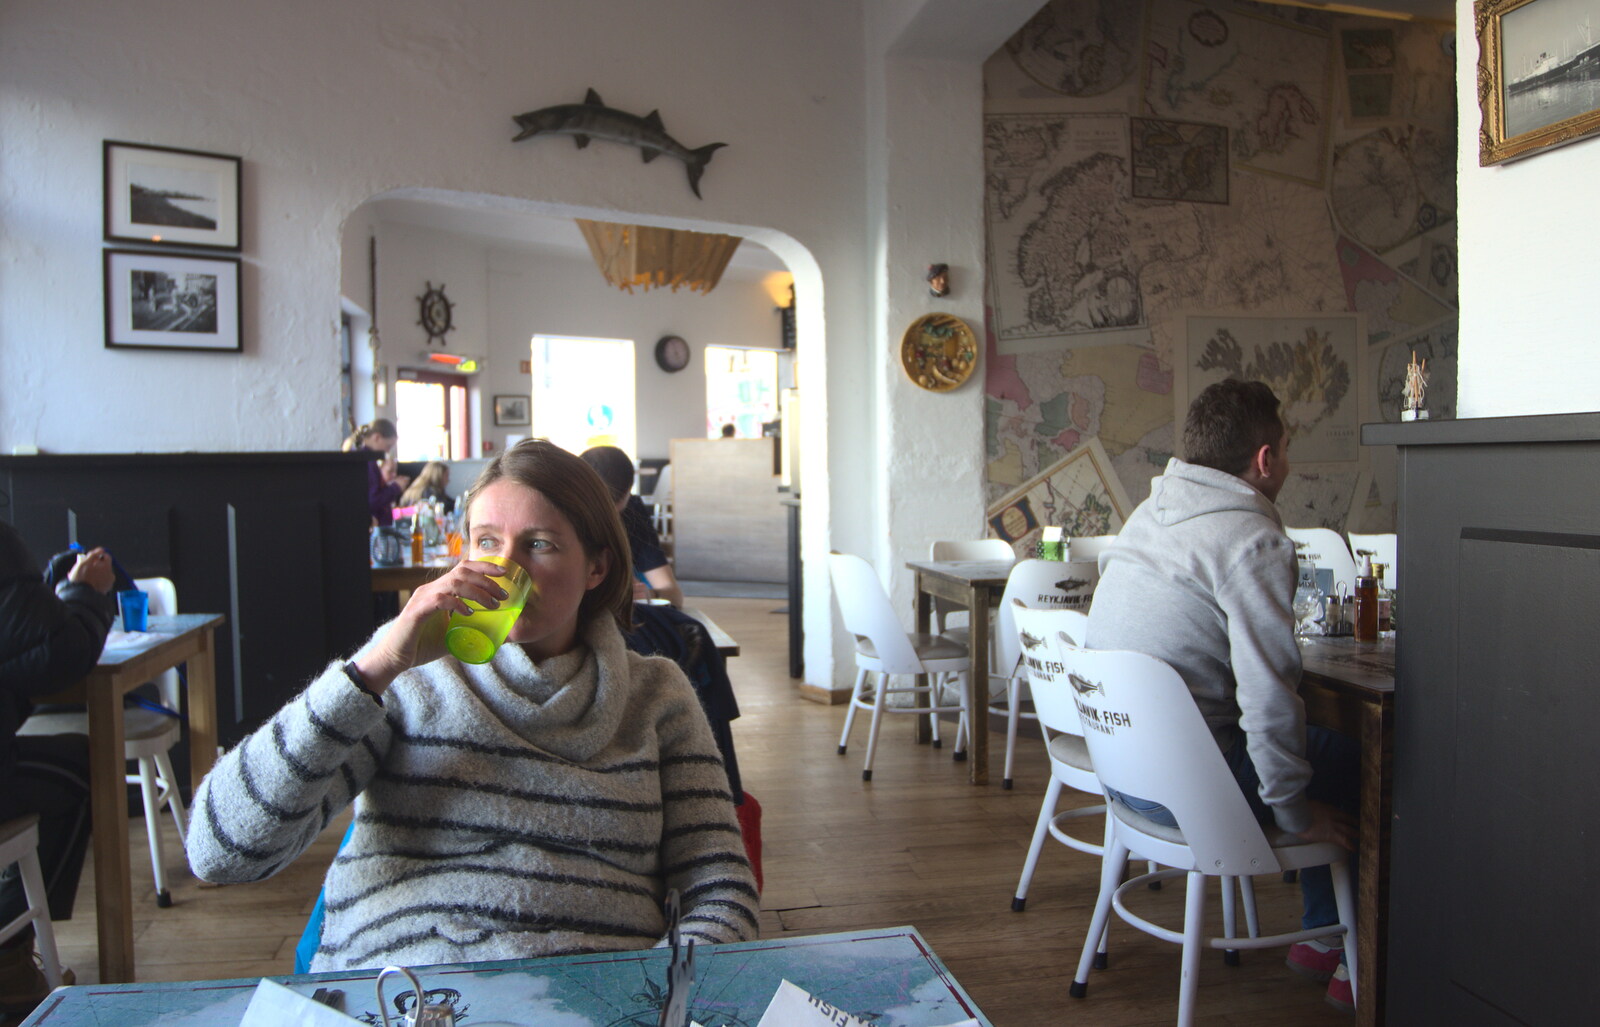 Isobel in the Reykjavík Fish (and Chips) restaurant from Hallgrímskirkja Cathedral and Whale Watching, Reykjavik - 21st April 2017